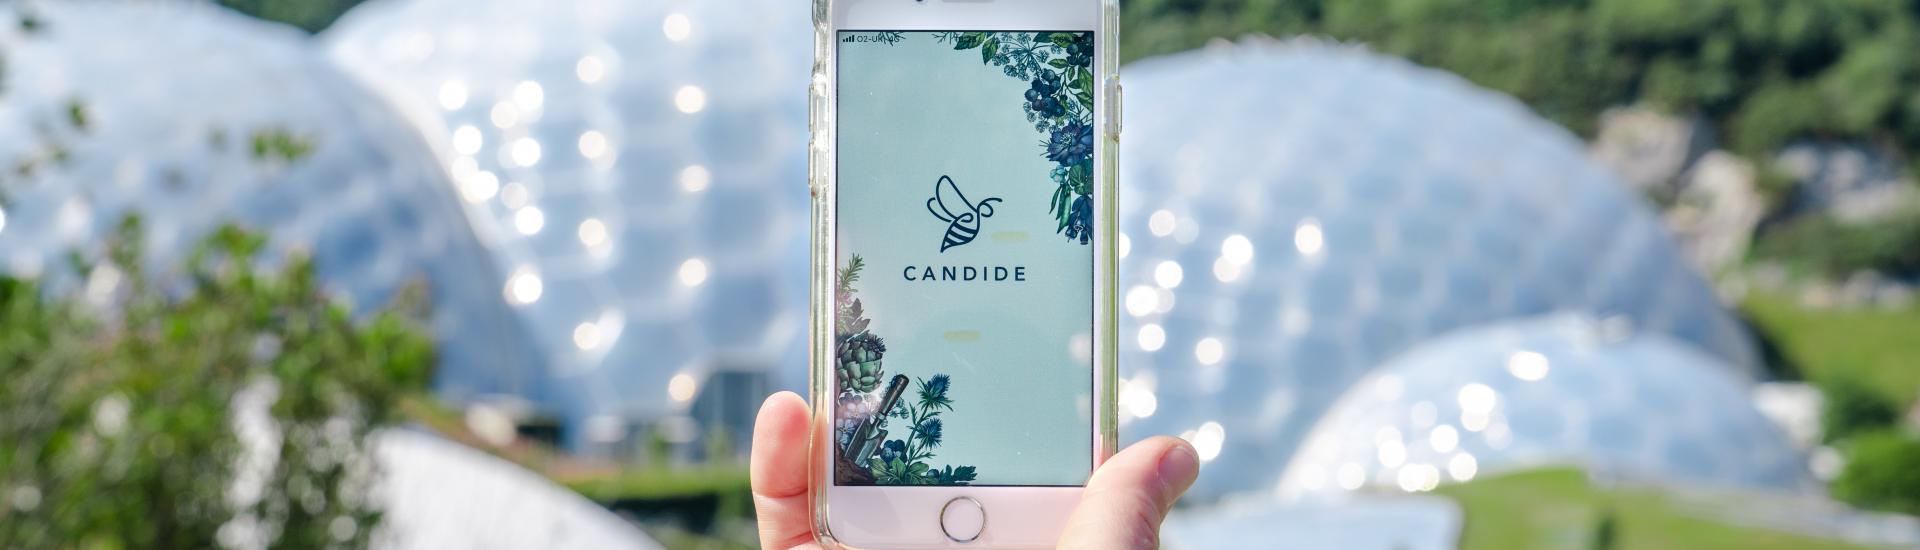 A view of a mobile with the Candide app open and in the background is the Eden Project biomes